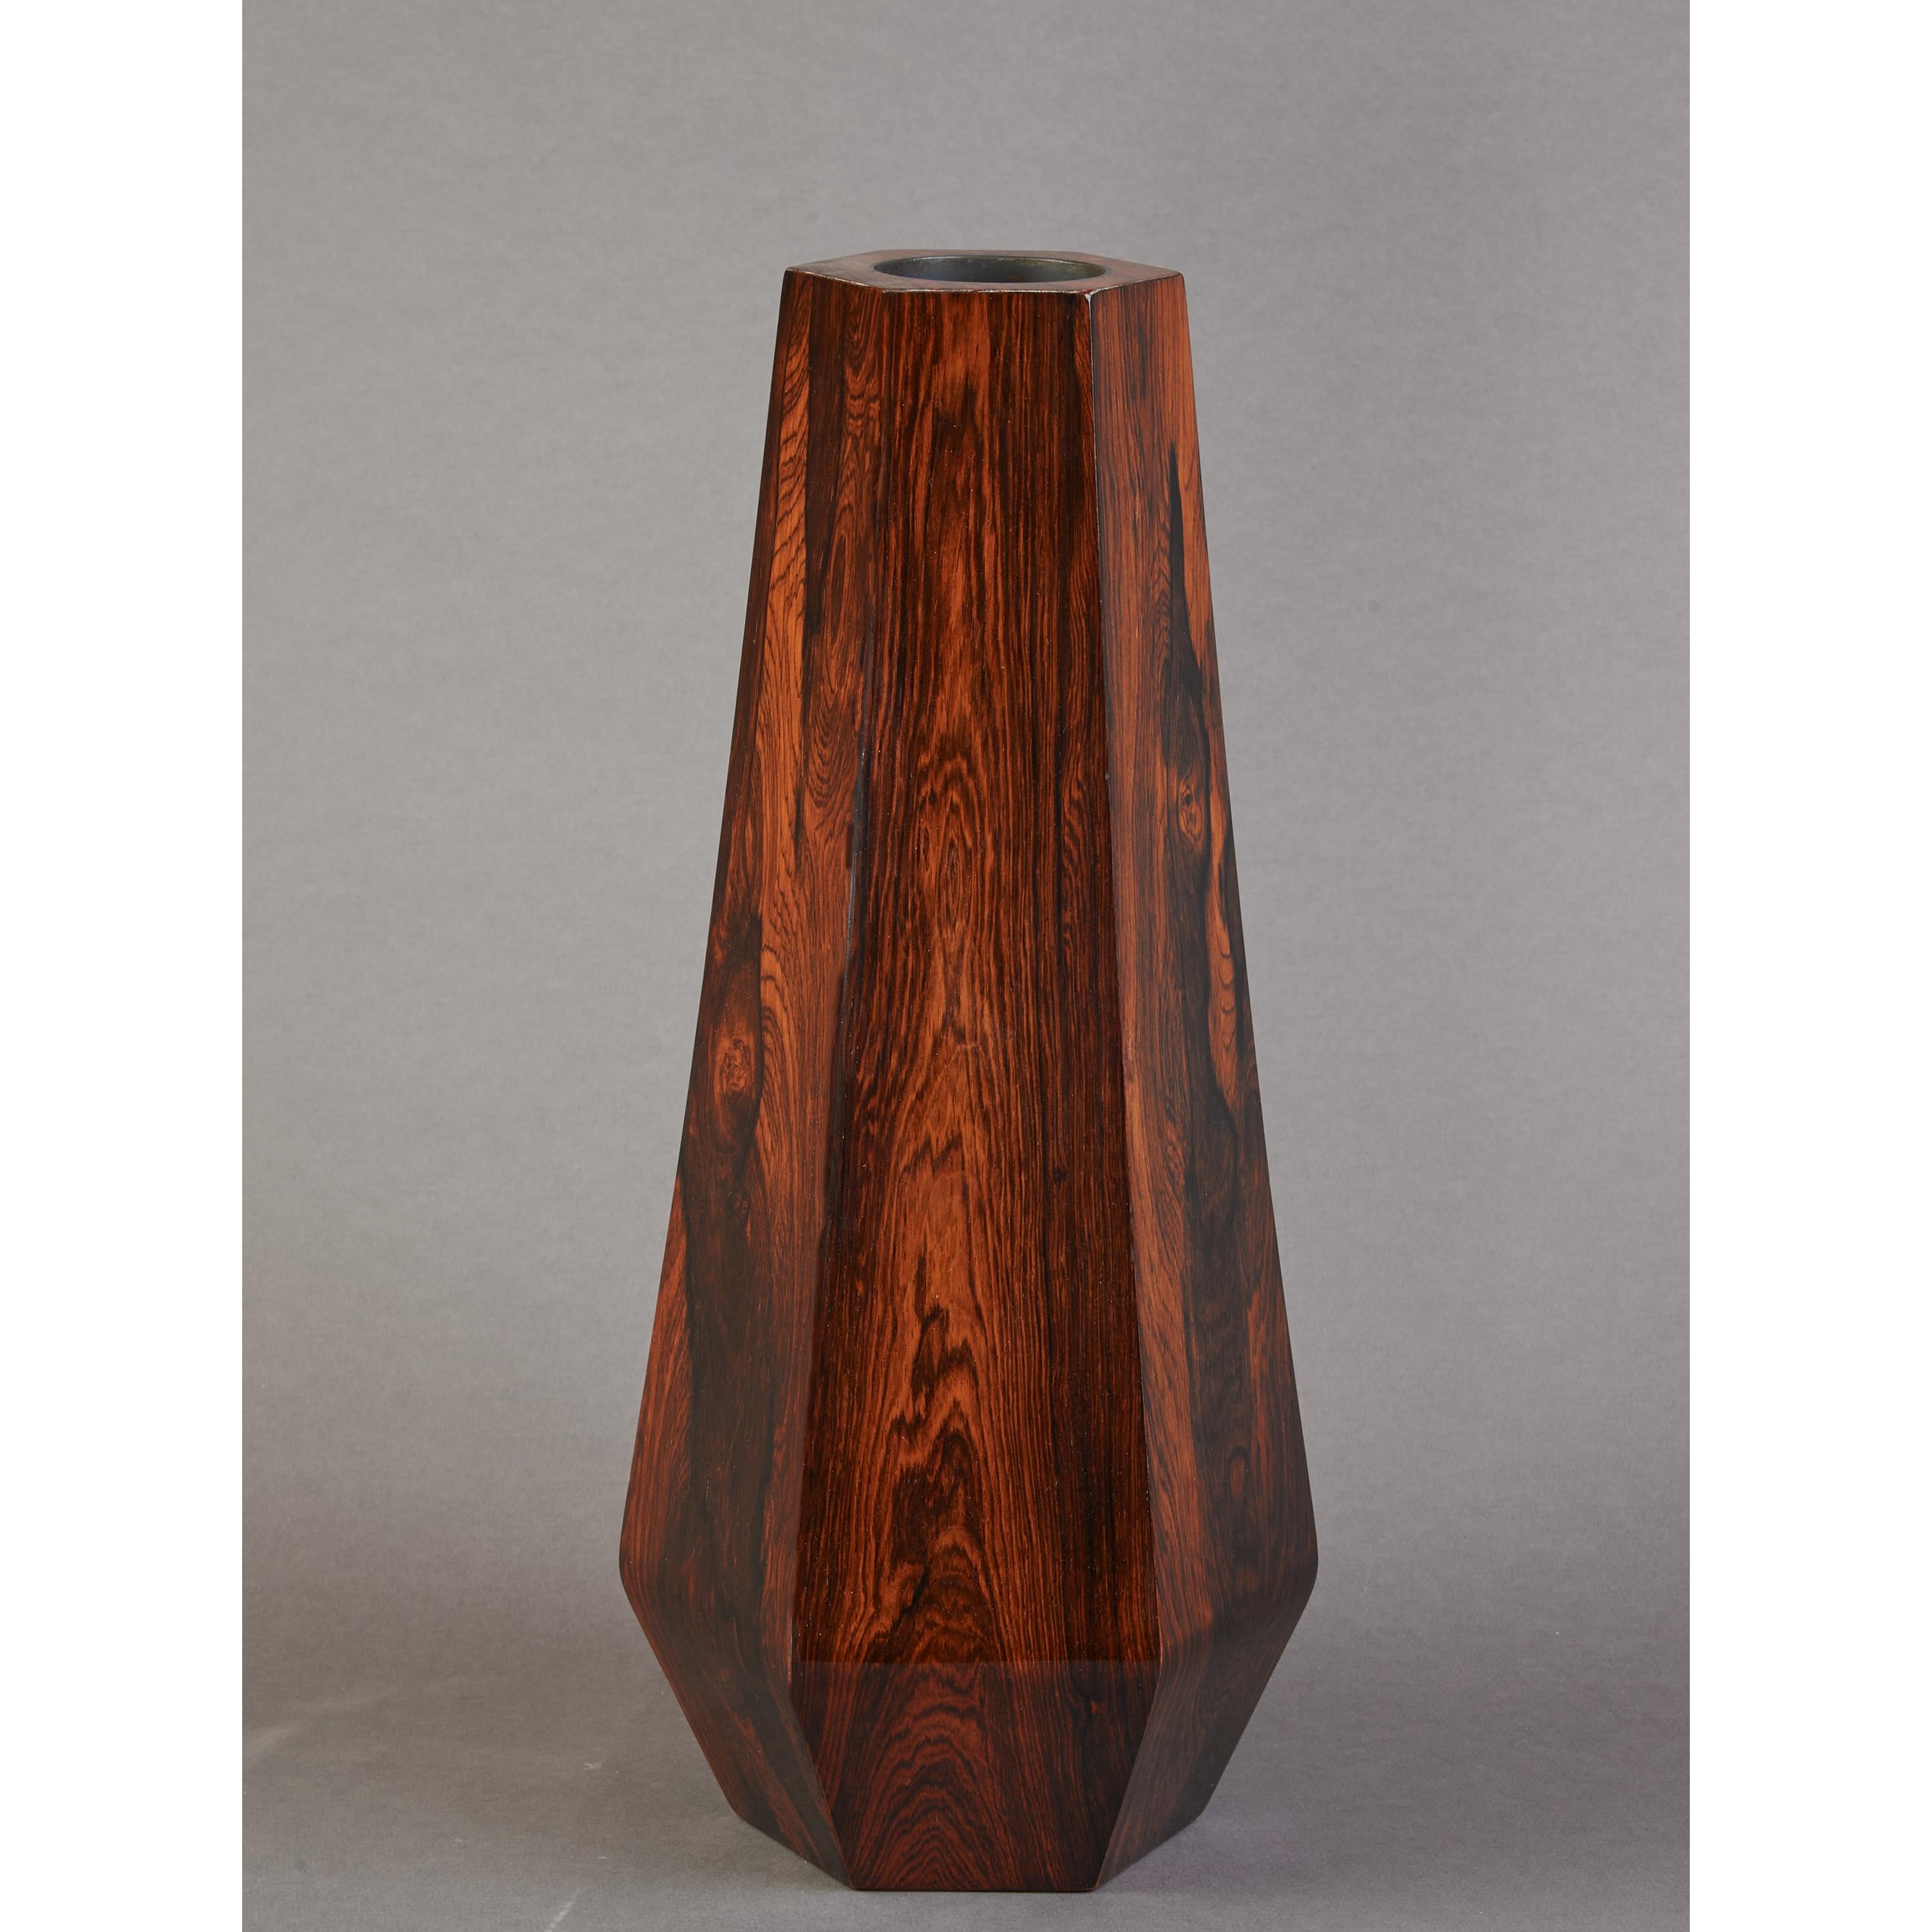 FRANCE, 1970's
Sculptural tall hexagonal tapered vessel, in richly veneered wood, beautifully grained and polished.
20 H x 10 W.